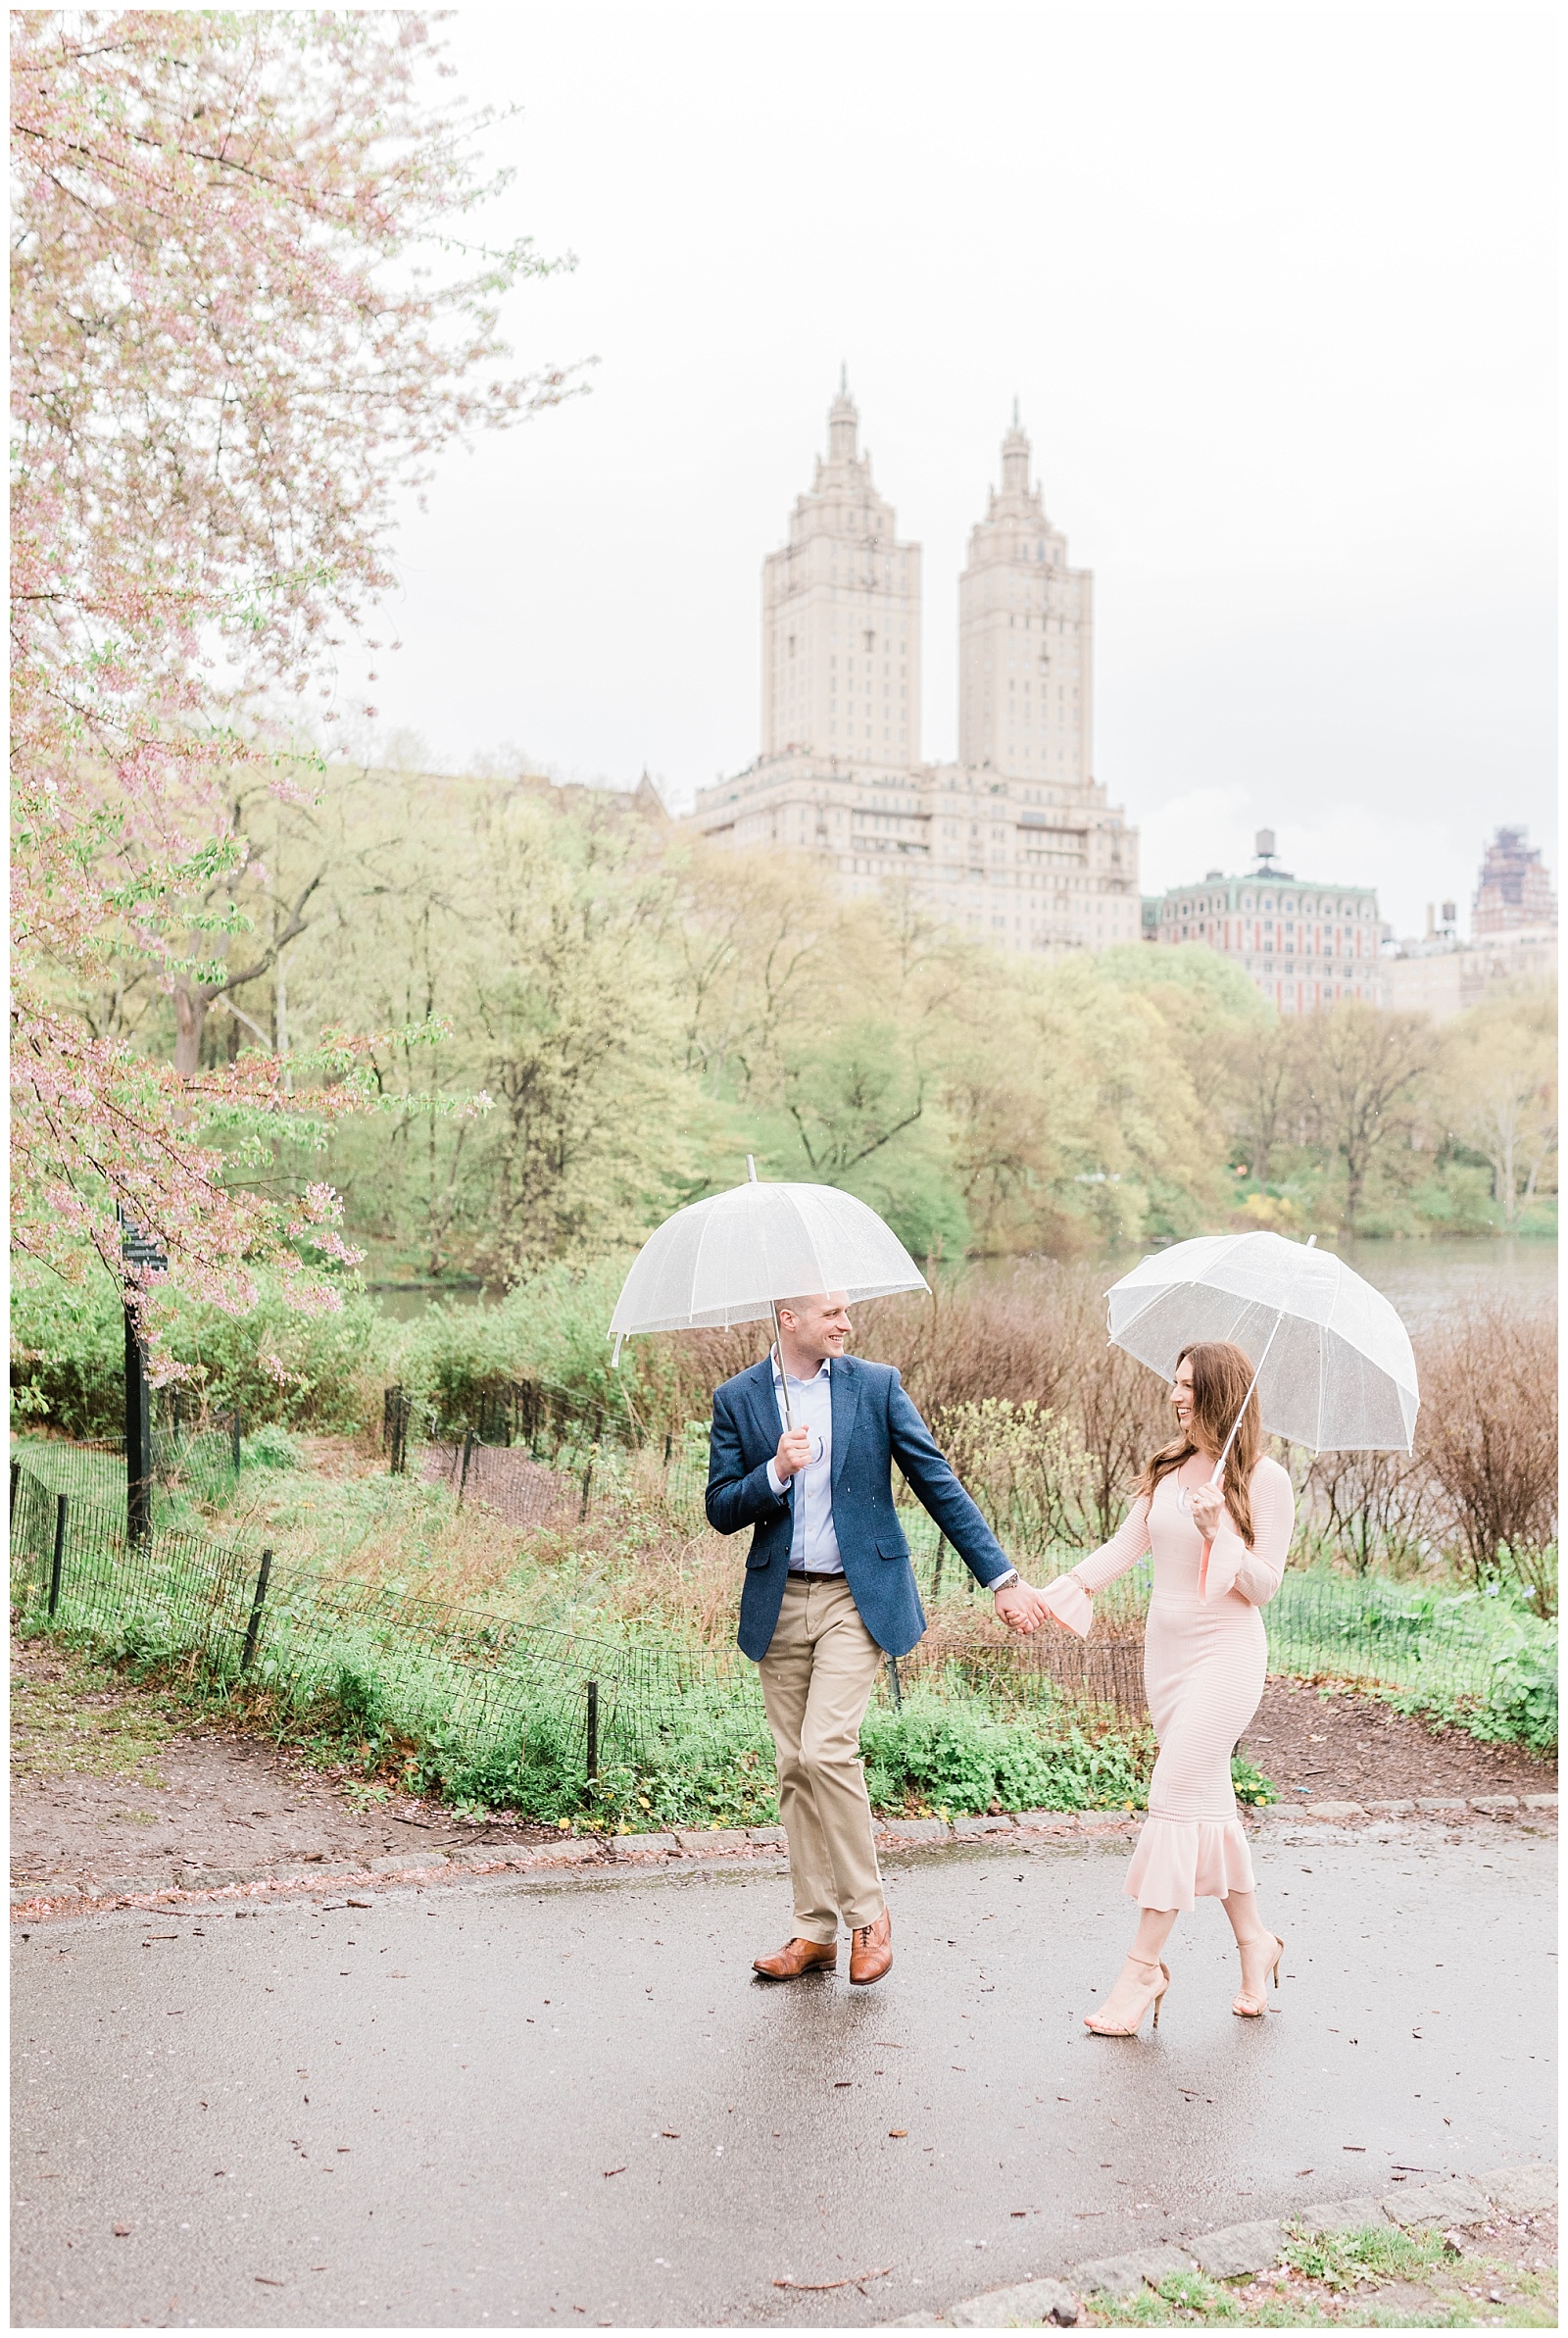 A couple holds hands walking through Central Park, NY in the rain.